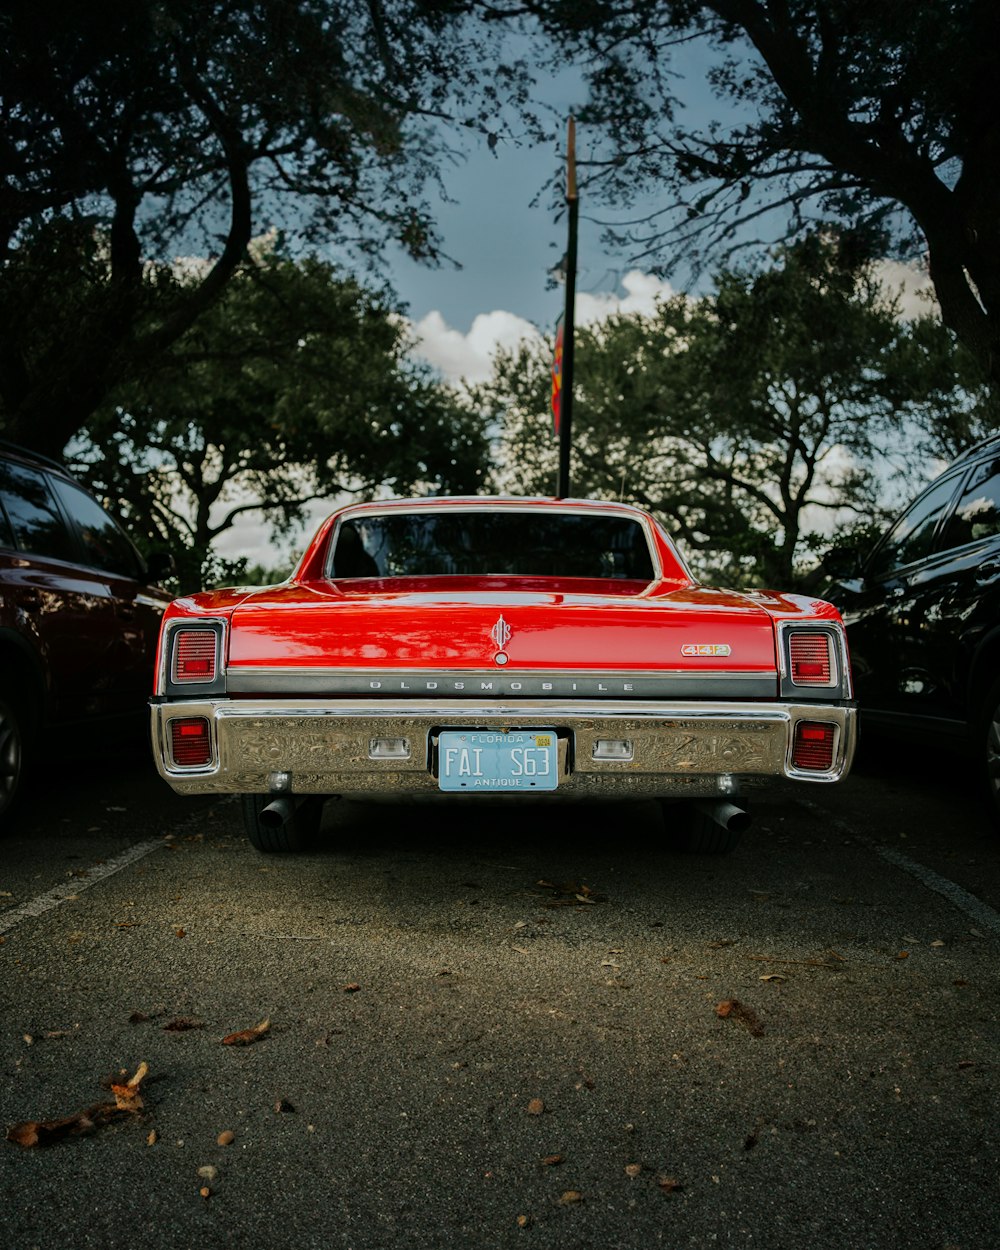 a red car is parked in a parking lot